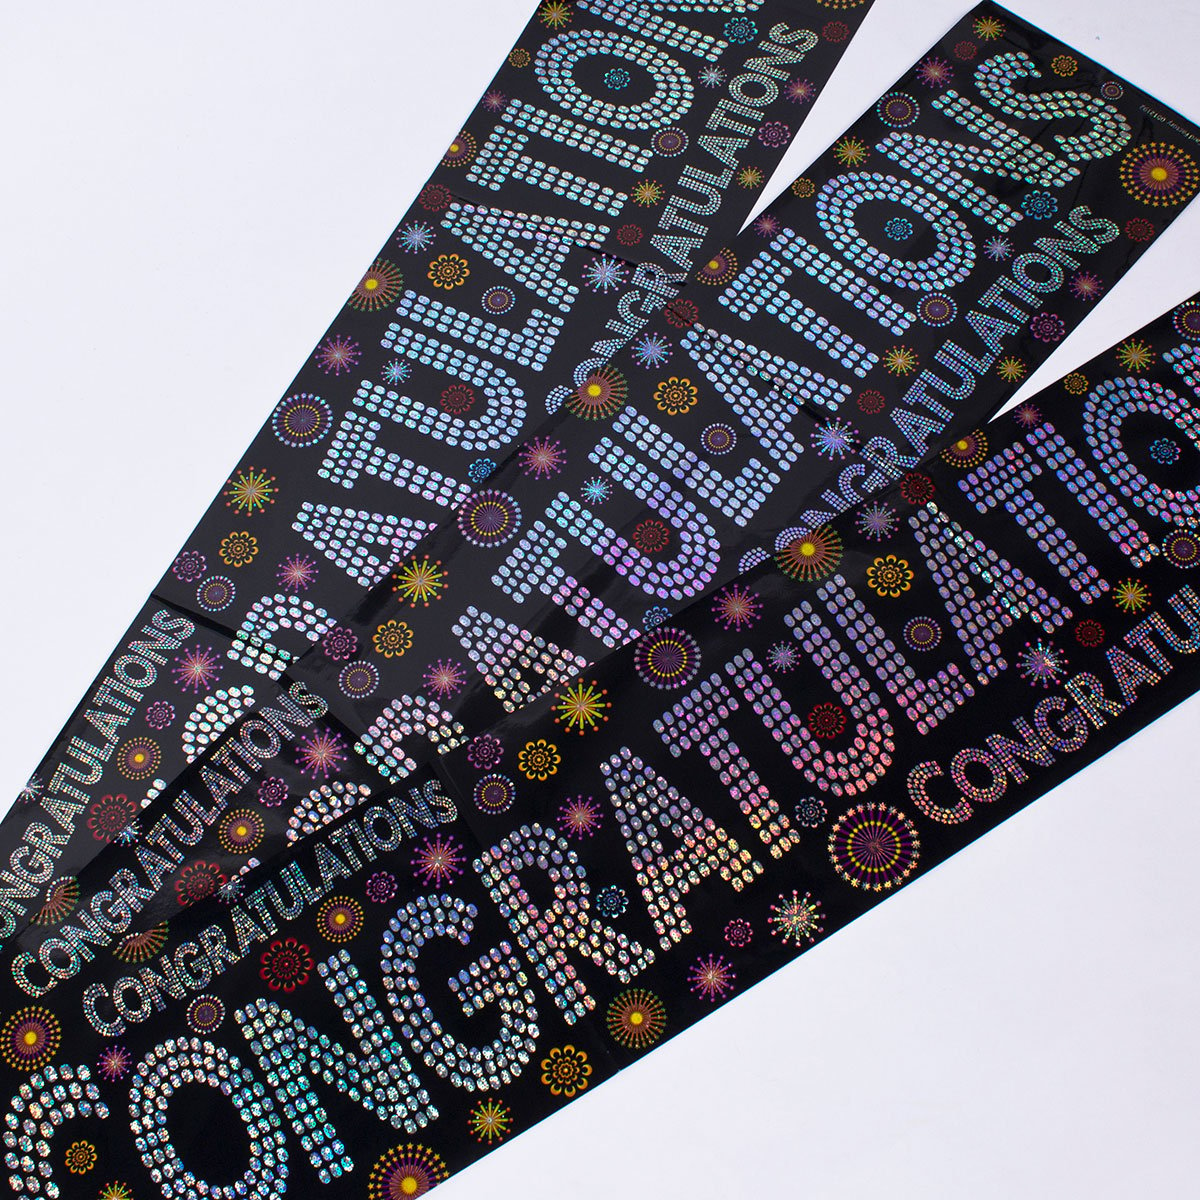 Holographic Black Congratulations Foil Banners - Pack of 3